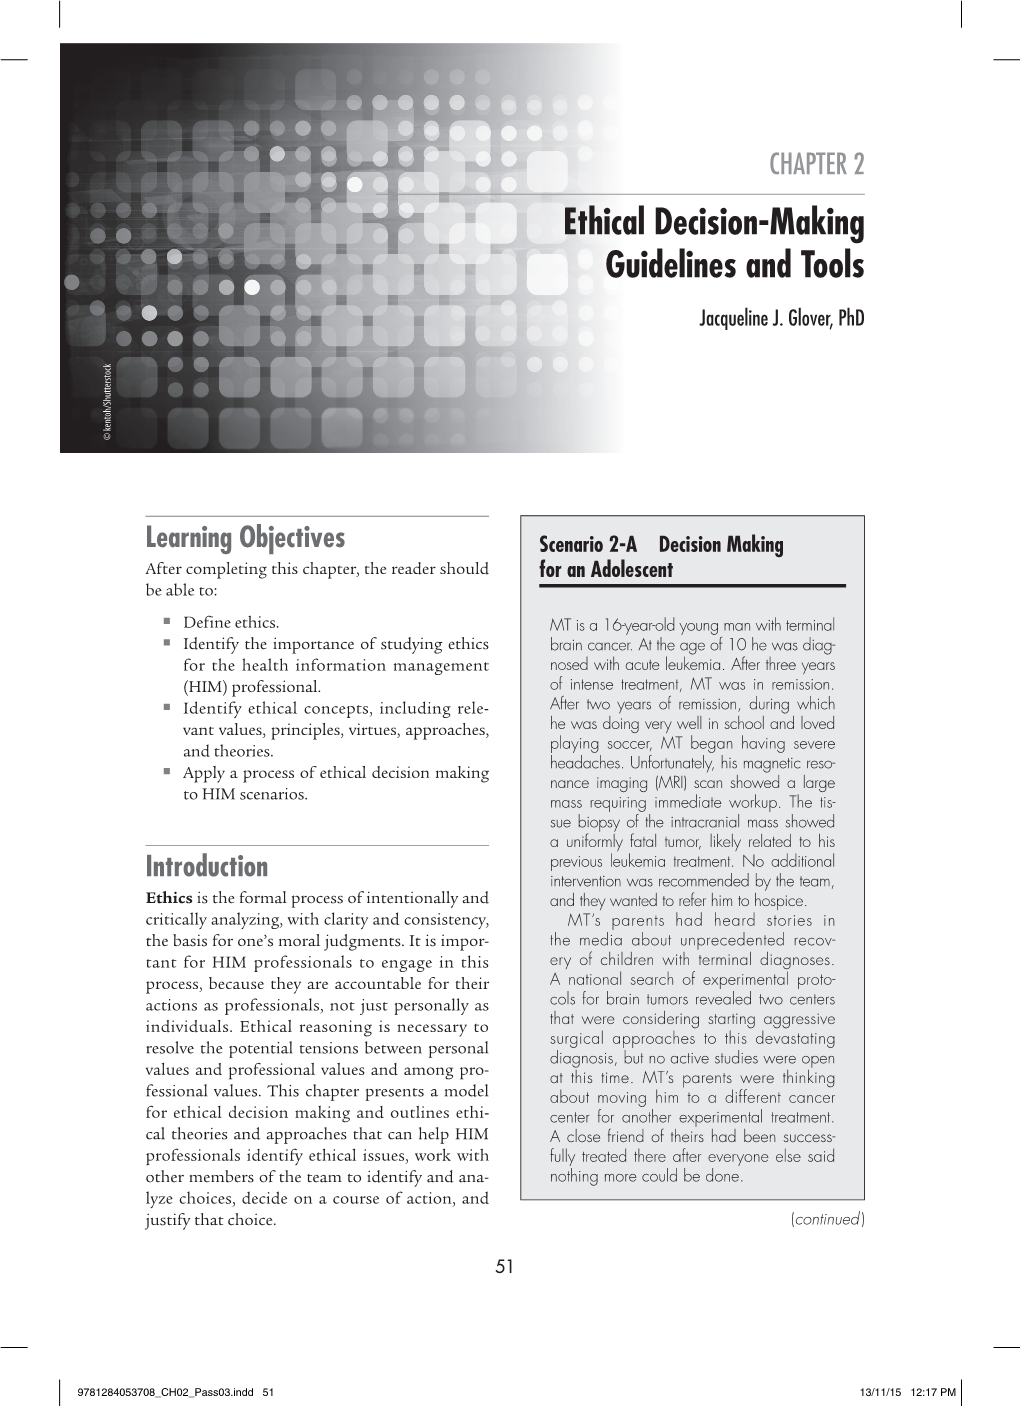 Chapter 2 Ethical Decision-Making Guidelines and Tools